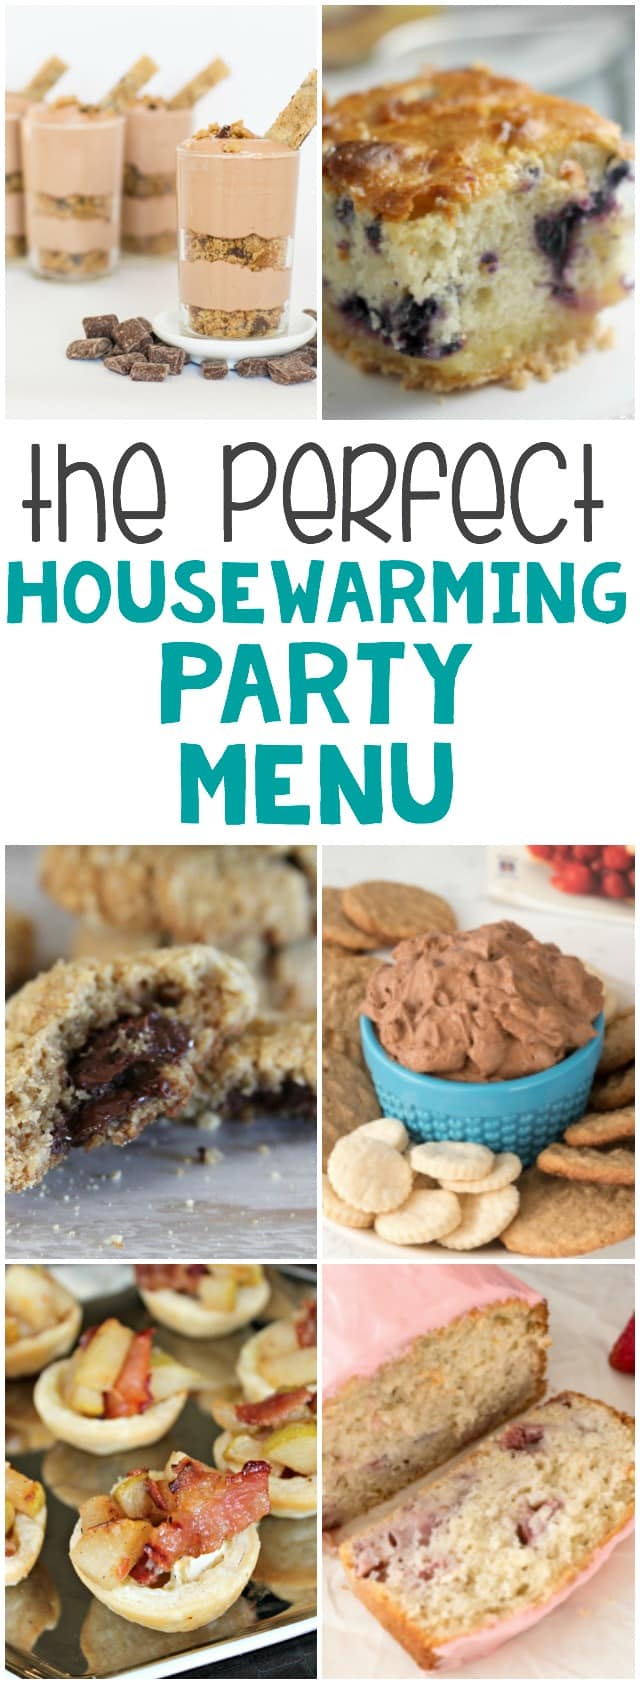 The Perfect Housewarming Party Menu featuring Krusteaz